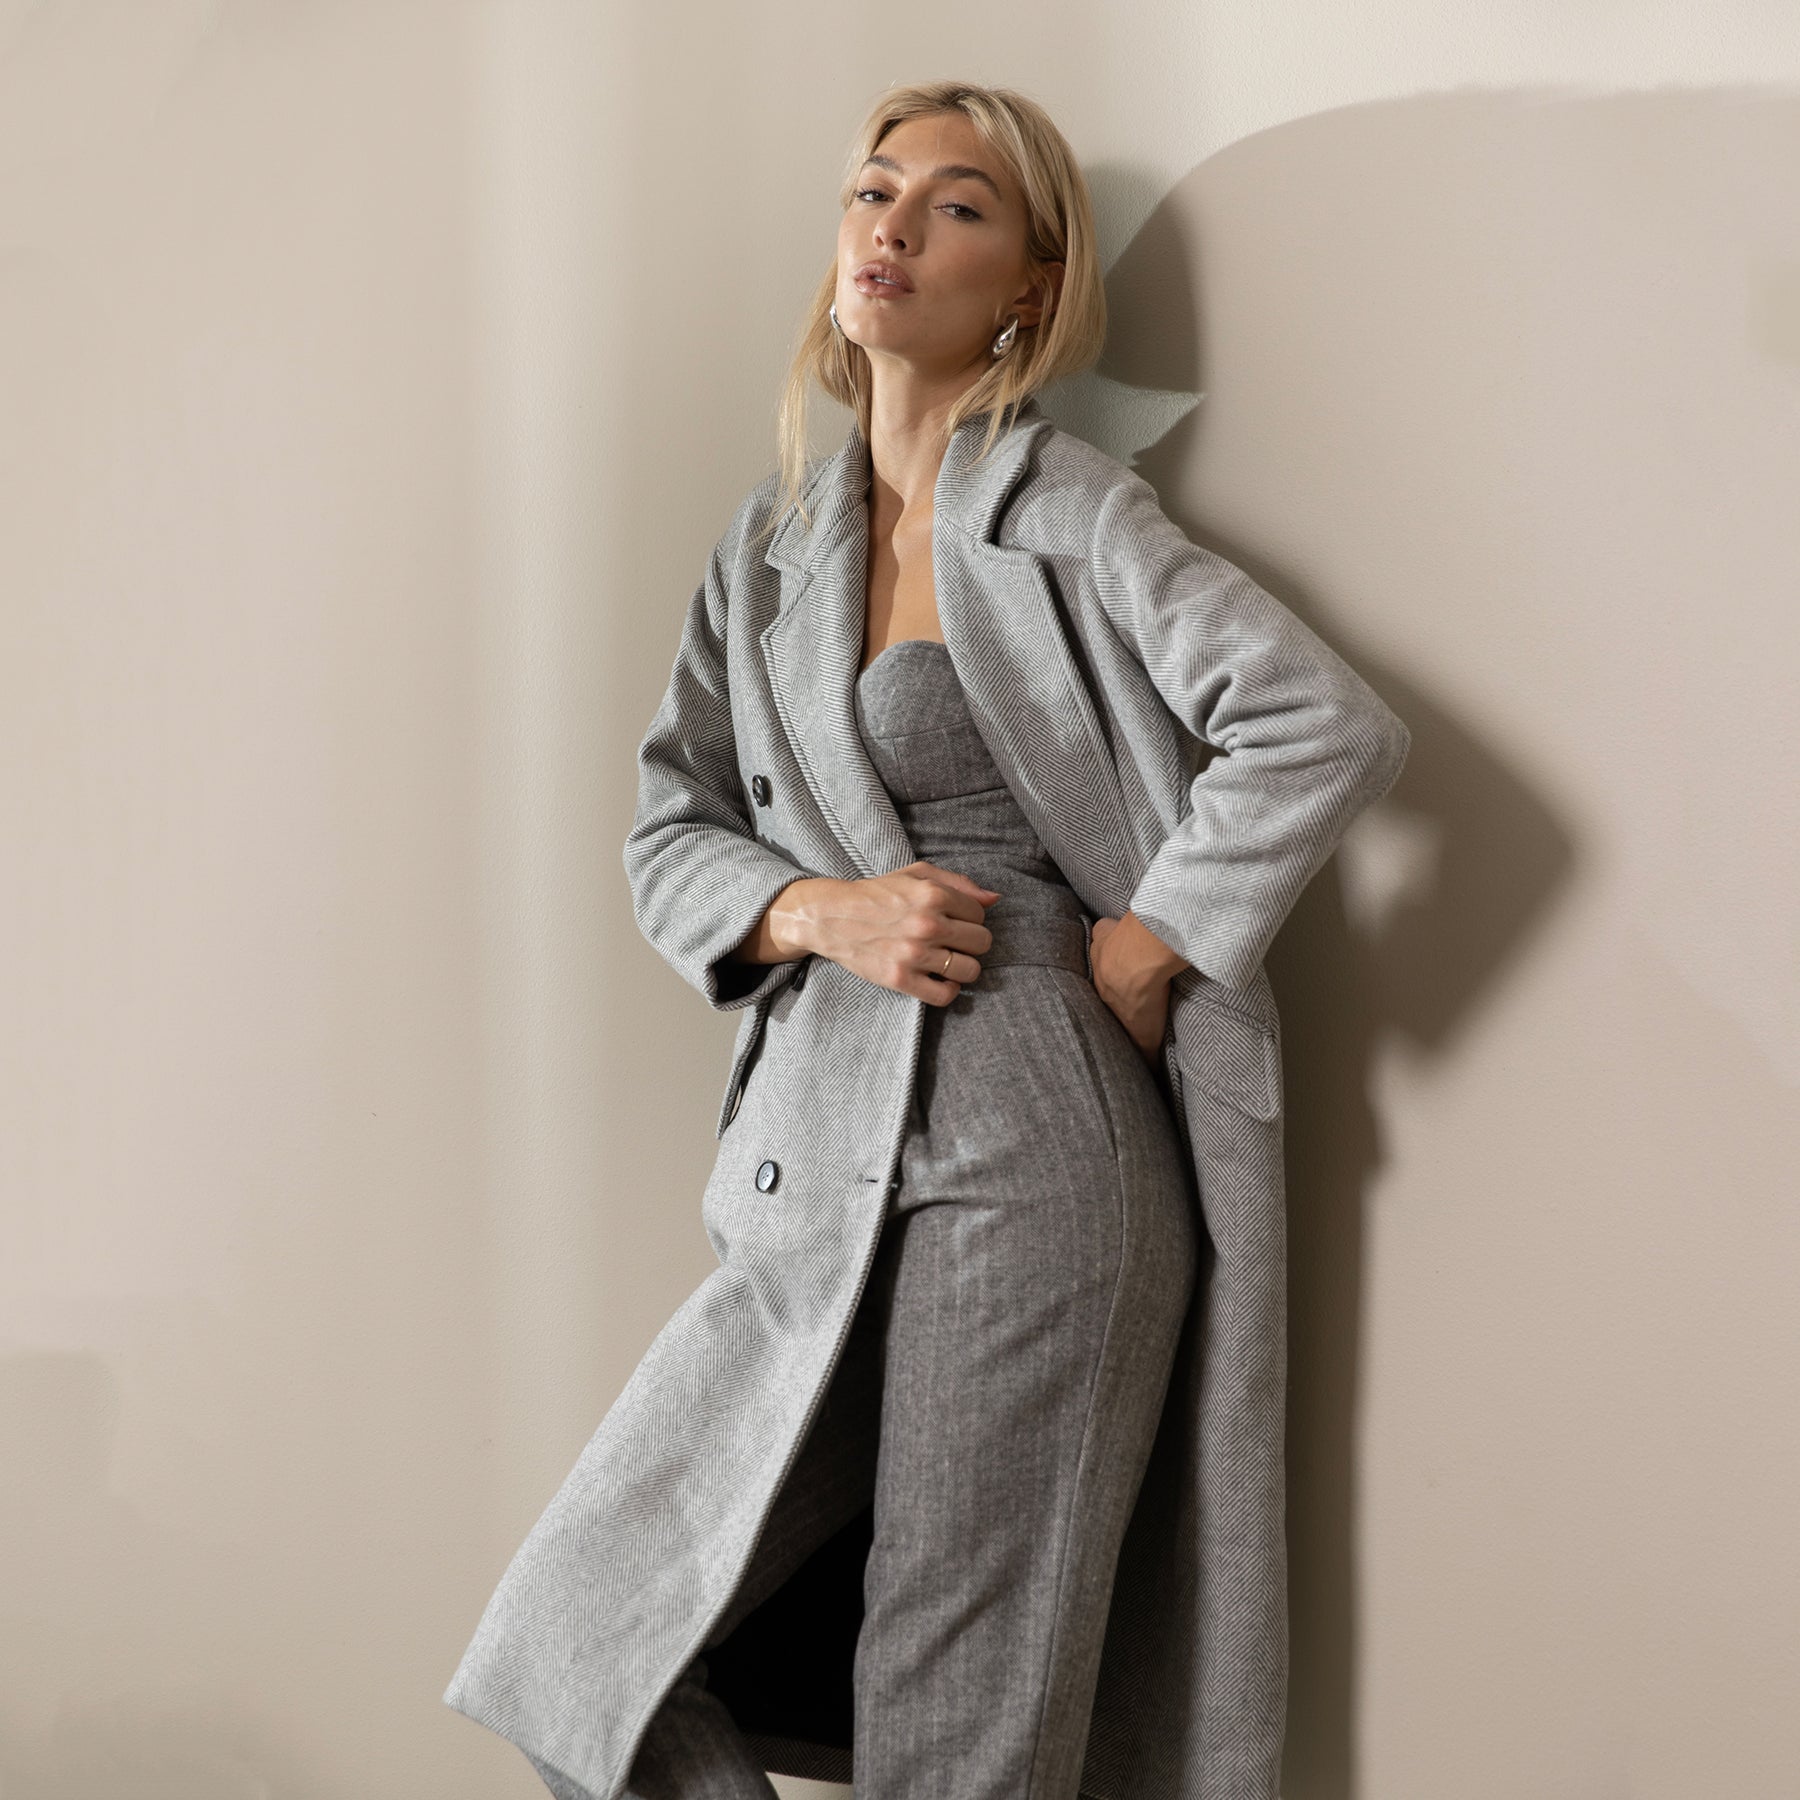 The Line and Dot - Women's Contemporary Brand – Line & Dot